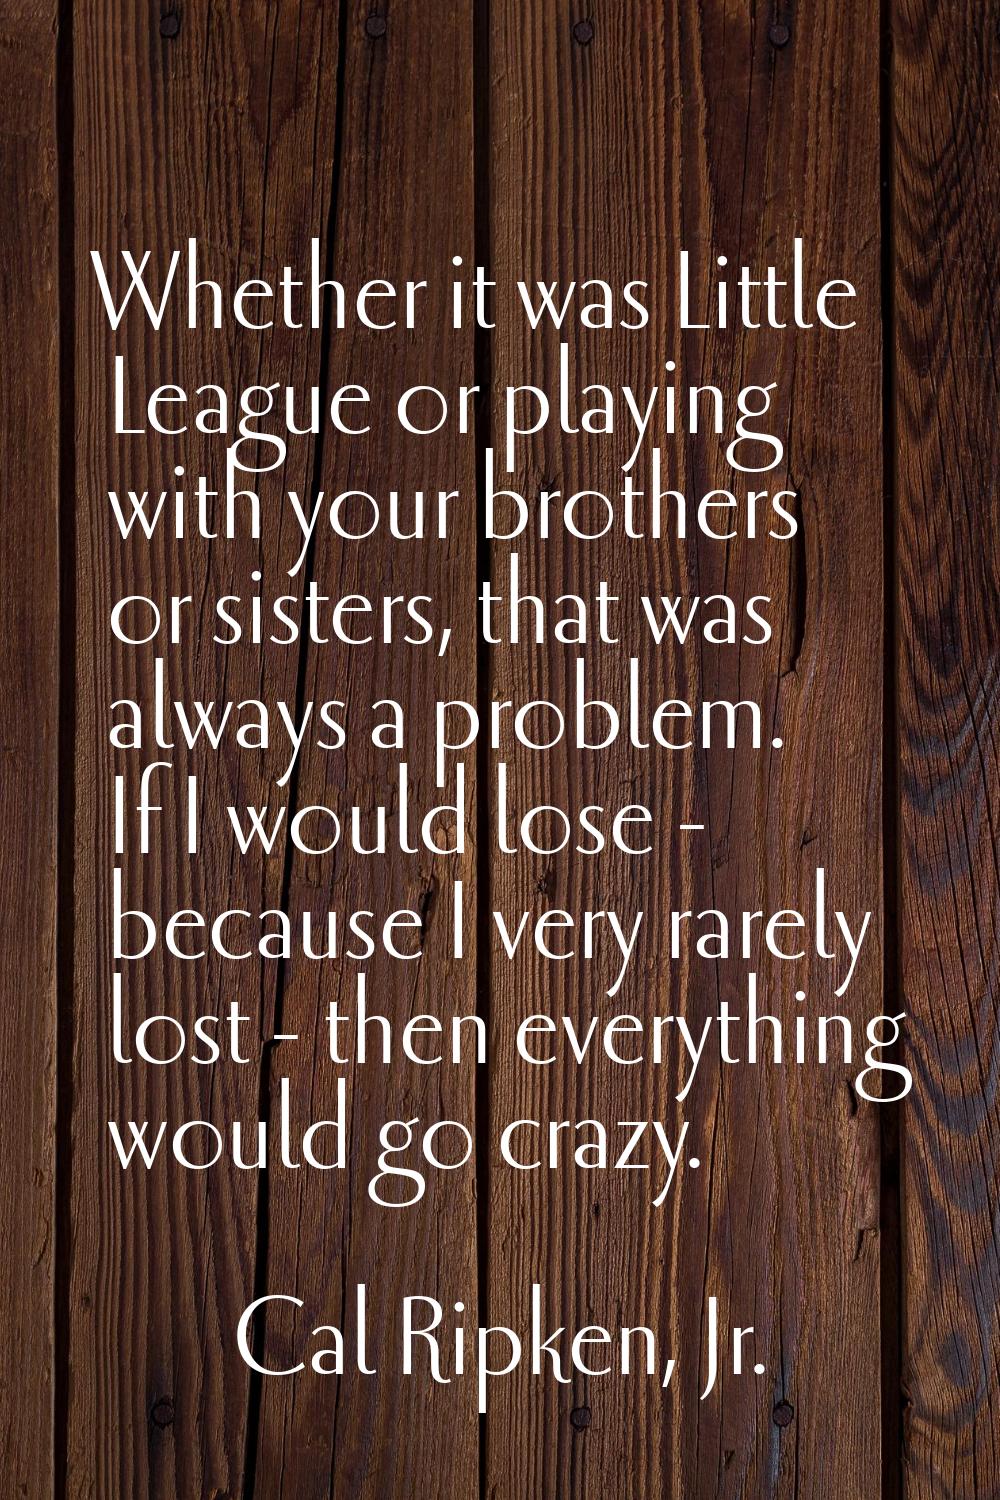 Whether it was Little League or playing with your brothers or sisters, that was always a problem. I